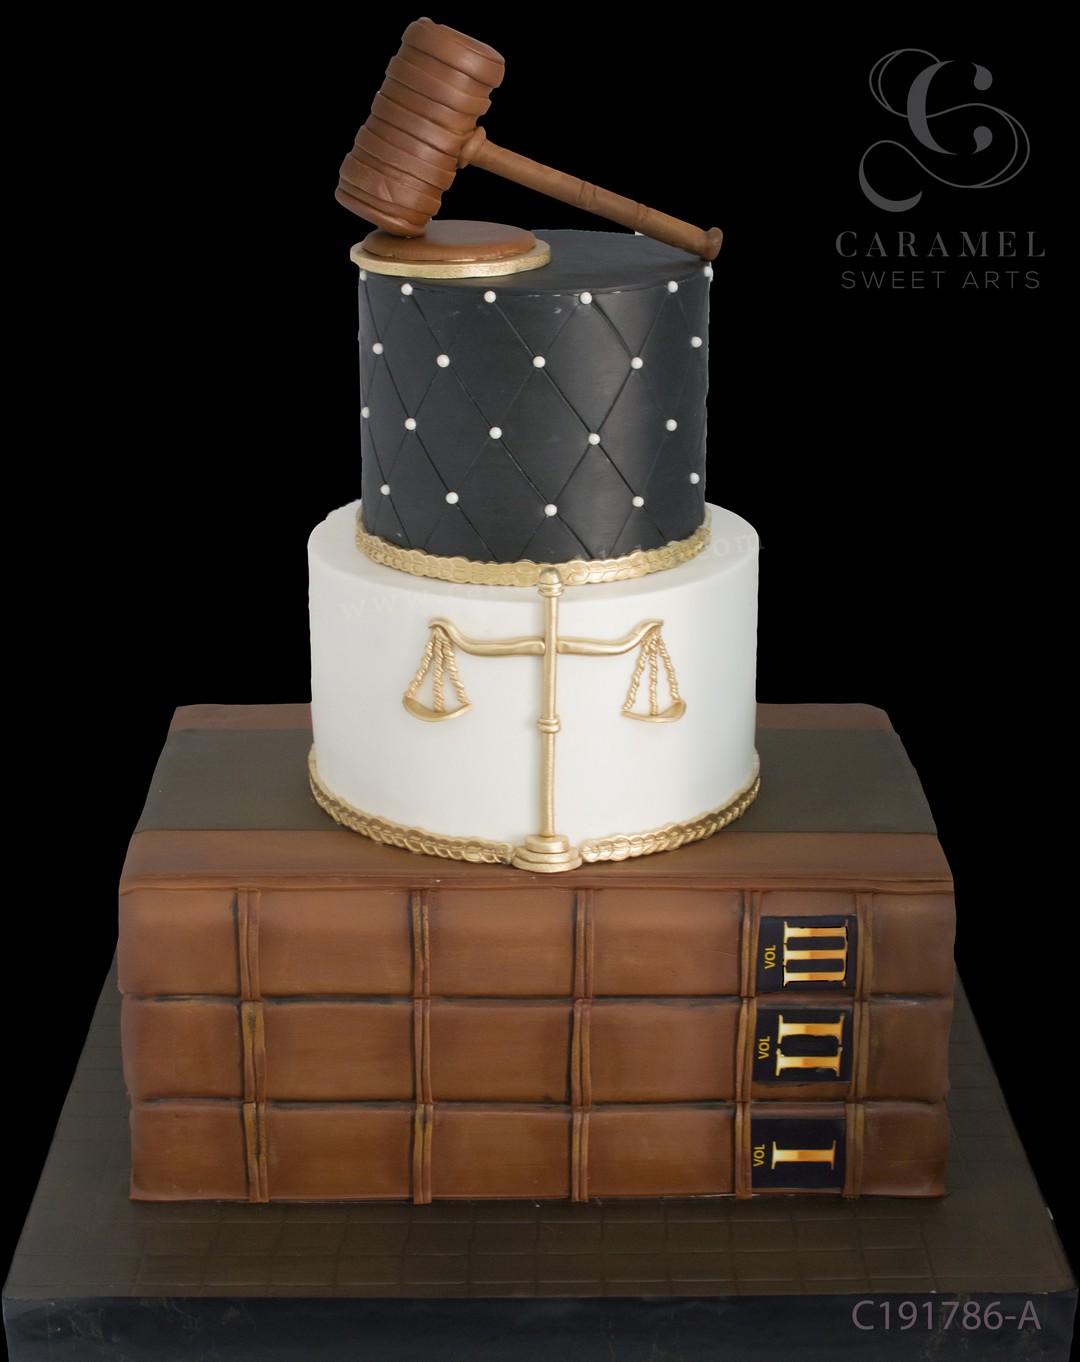 Share 79+ cake for lawyer birthday - in.daotaonec